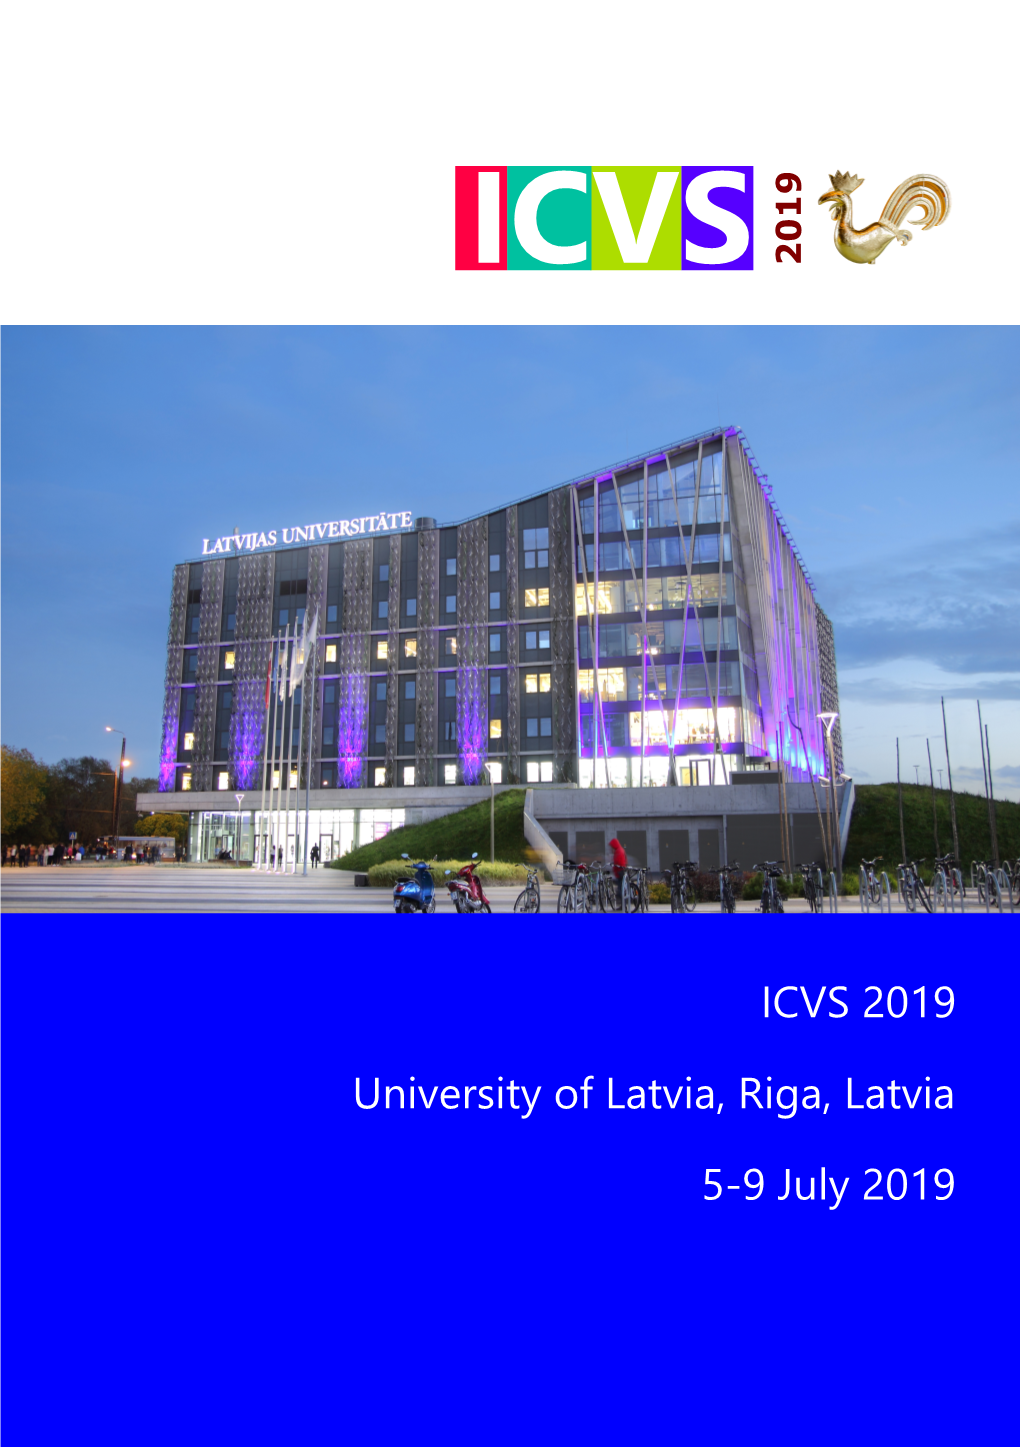 ICVS 2019 | 25Th Symposium of the International Colour Vision Society